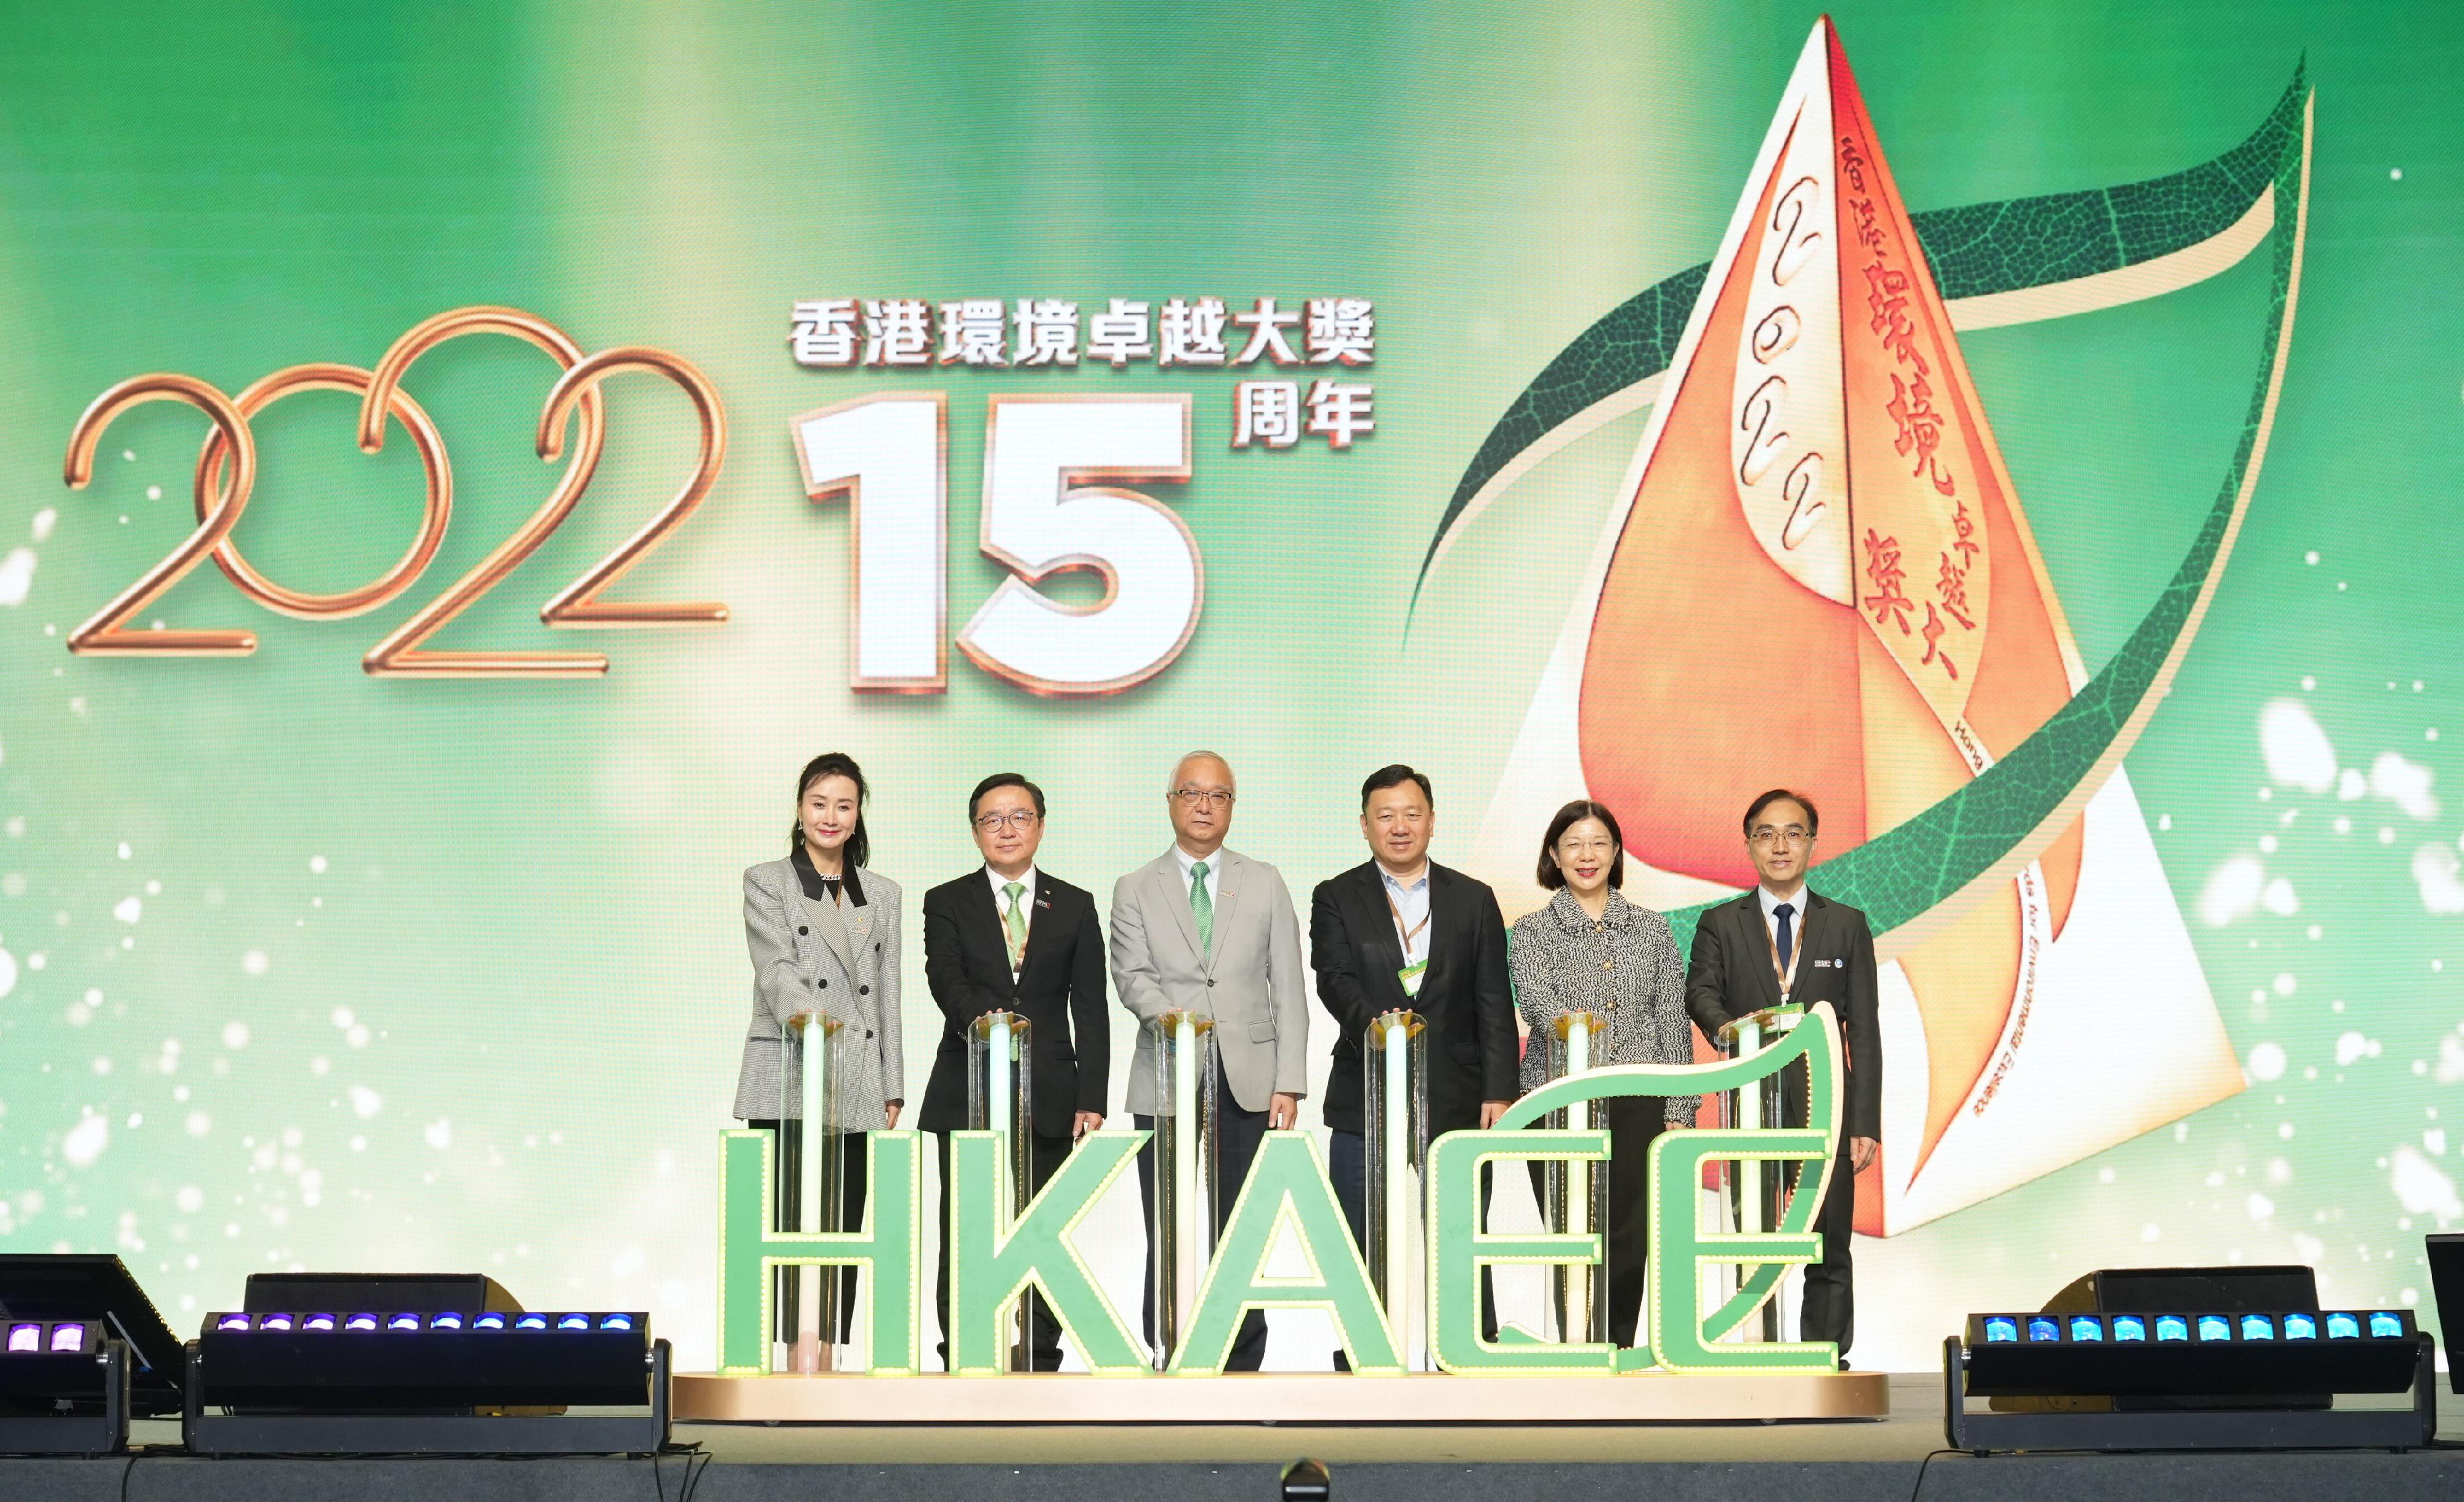 The Secretary for Environment and Ecology, Mr Tse Chin-wan, attended the 2022 Hong Kong Awards for Environmental Excellence (HKAEE) and Hong Kong Green Organisation Certification Presentation Ceremony at the Hong Kong Convention and Exhibition Centre today (December 15). Photo shows Mr Tse (third left) and the Awards Committee Chairman of the HKAEE, Dr Conrad Wong (third right), officiating at the kick-off ceremony with other guests.